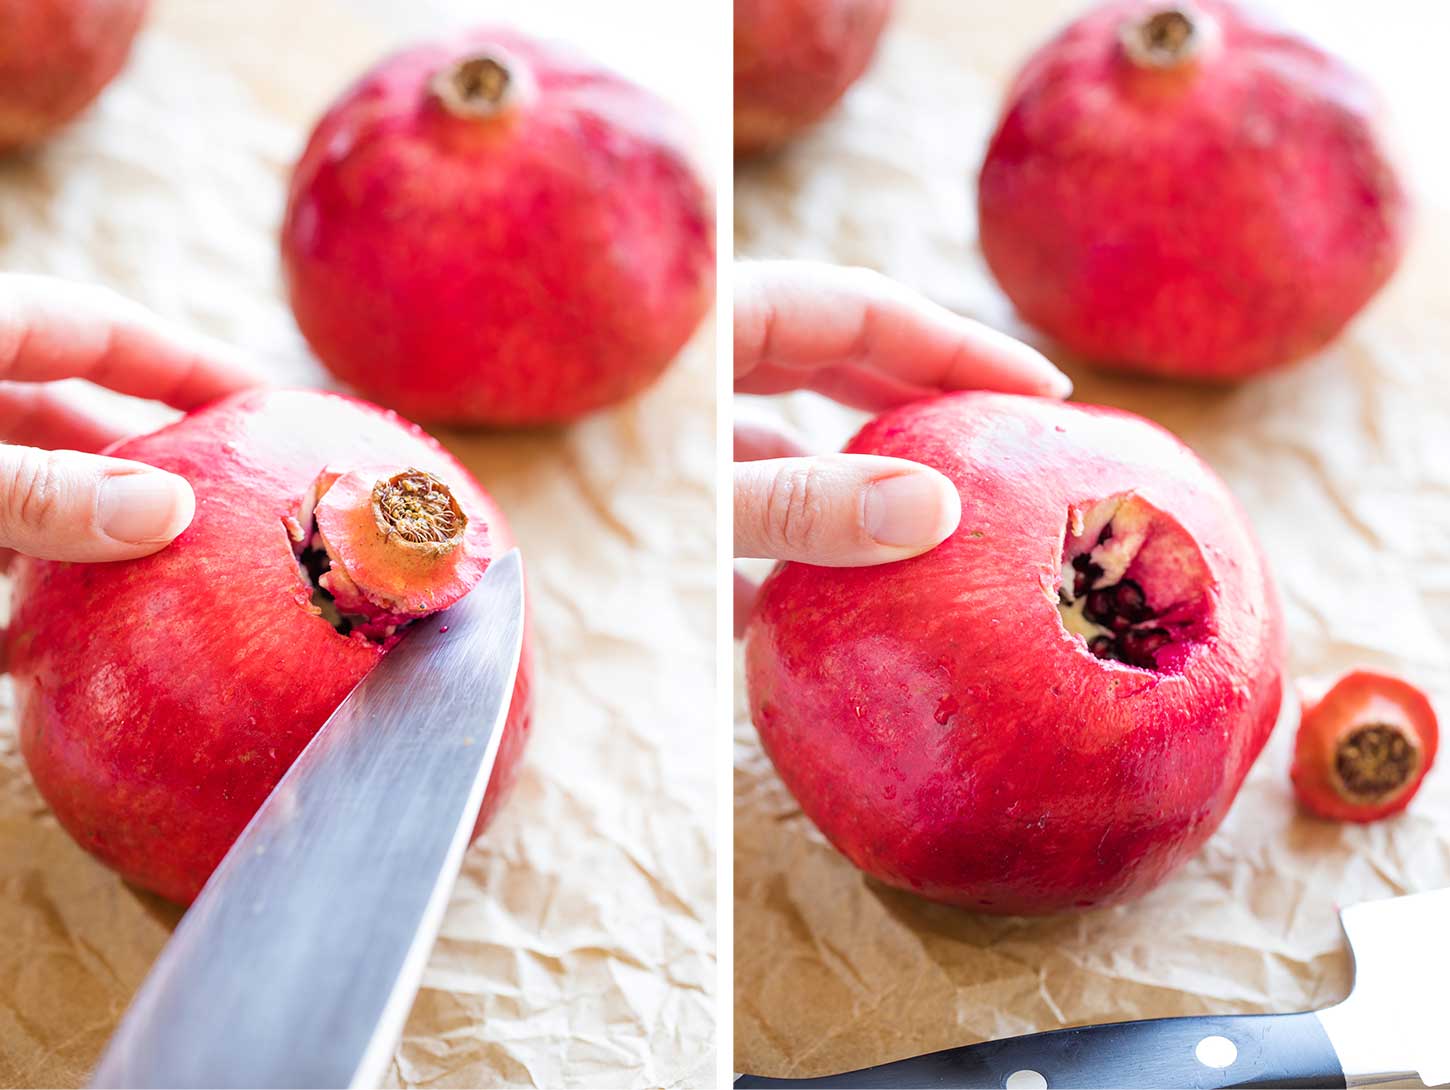 Collage of two photos showing how to cut out and remove the blossom end of the pomegranate.